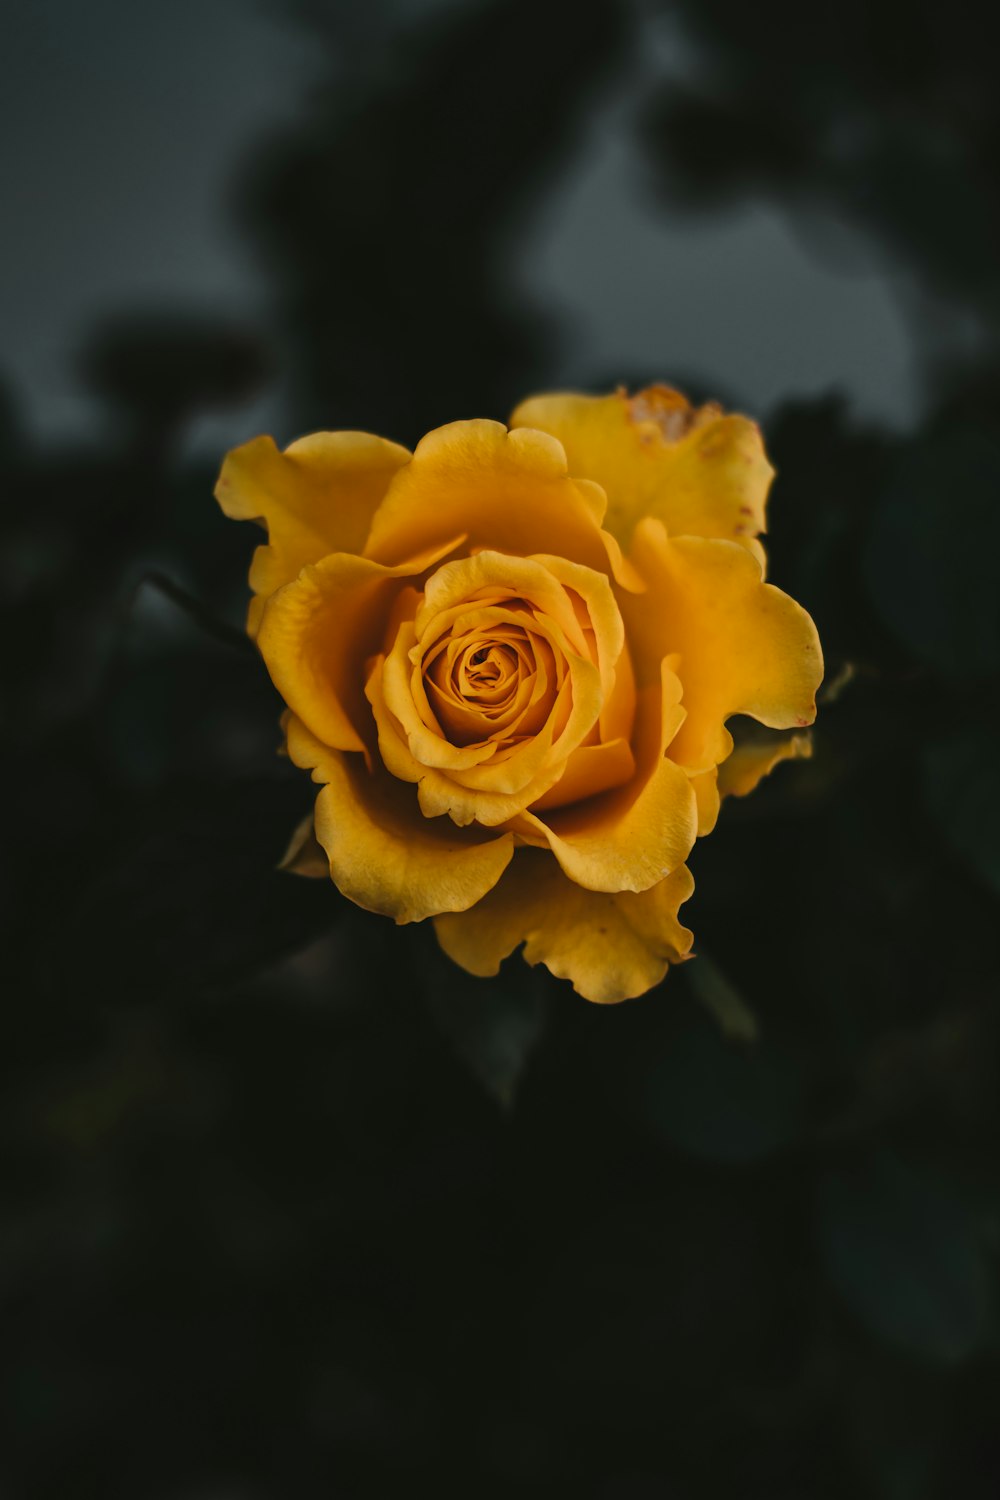 yellow rose in bloom close up photo